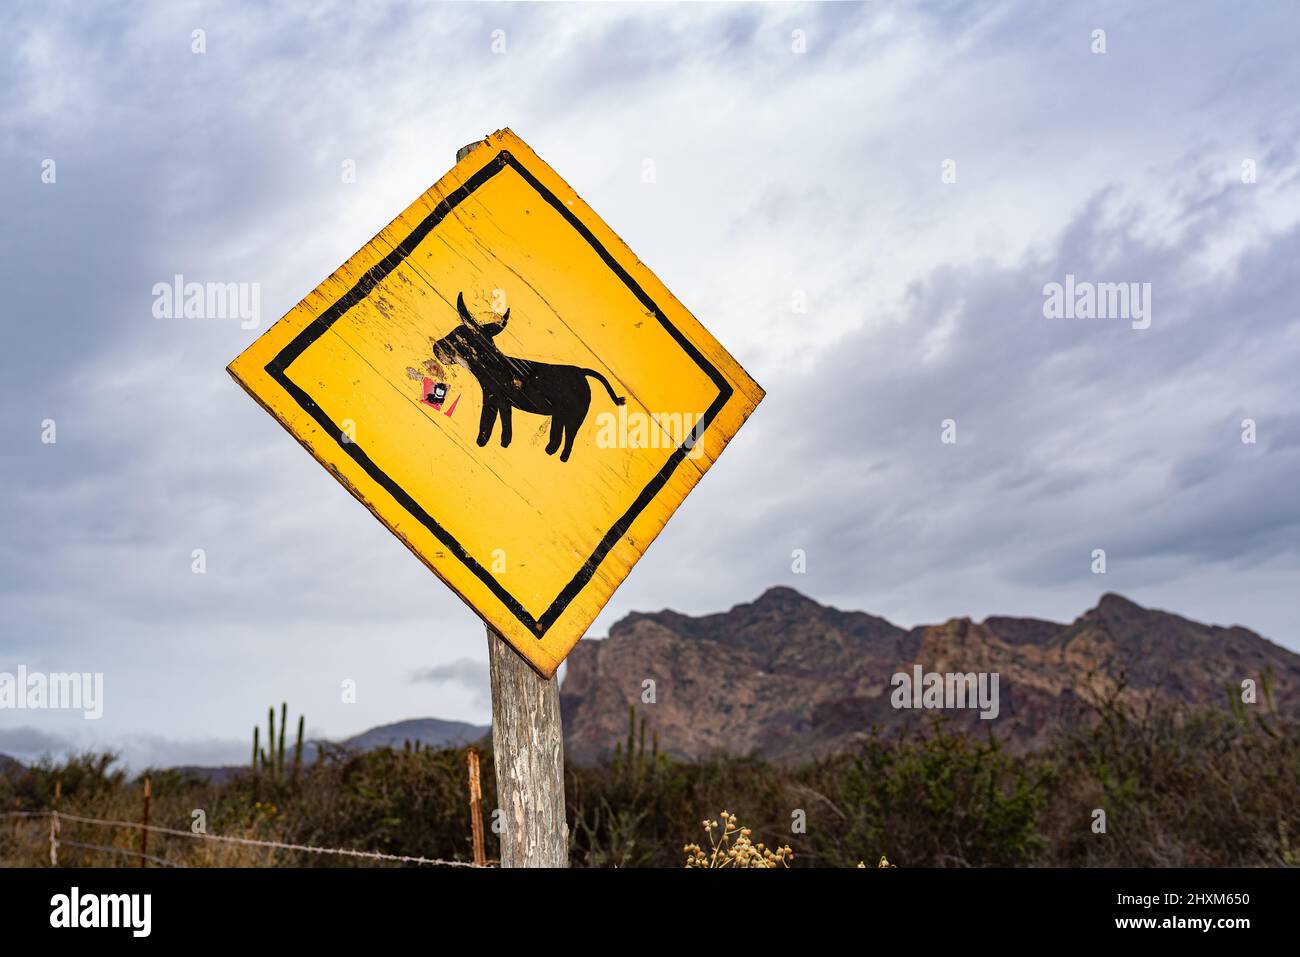 A yellow diamond shaped caution sign with a black burro on it warns drivers to watch for animals. Stock Photo